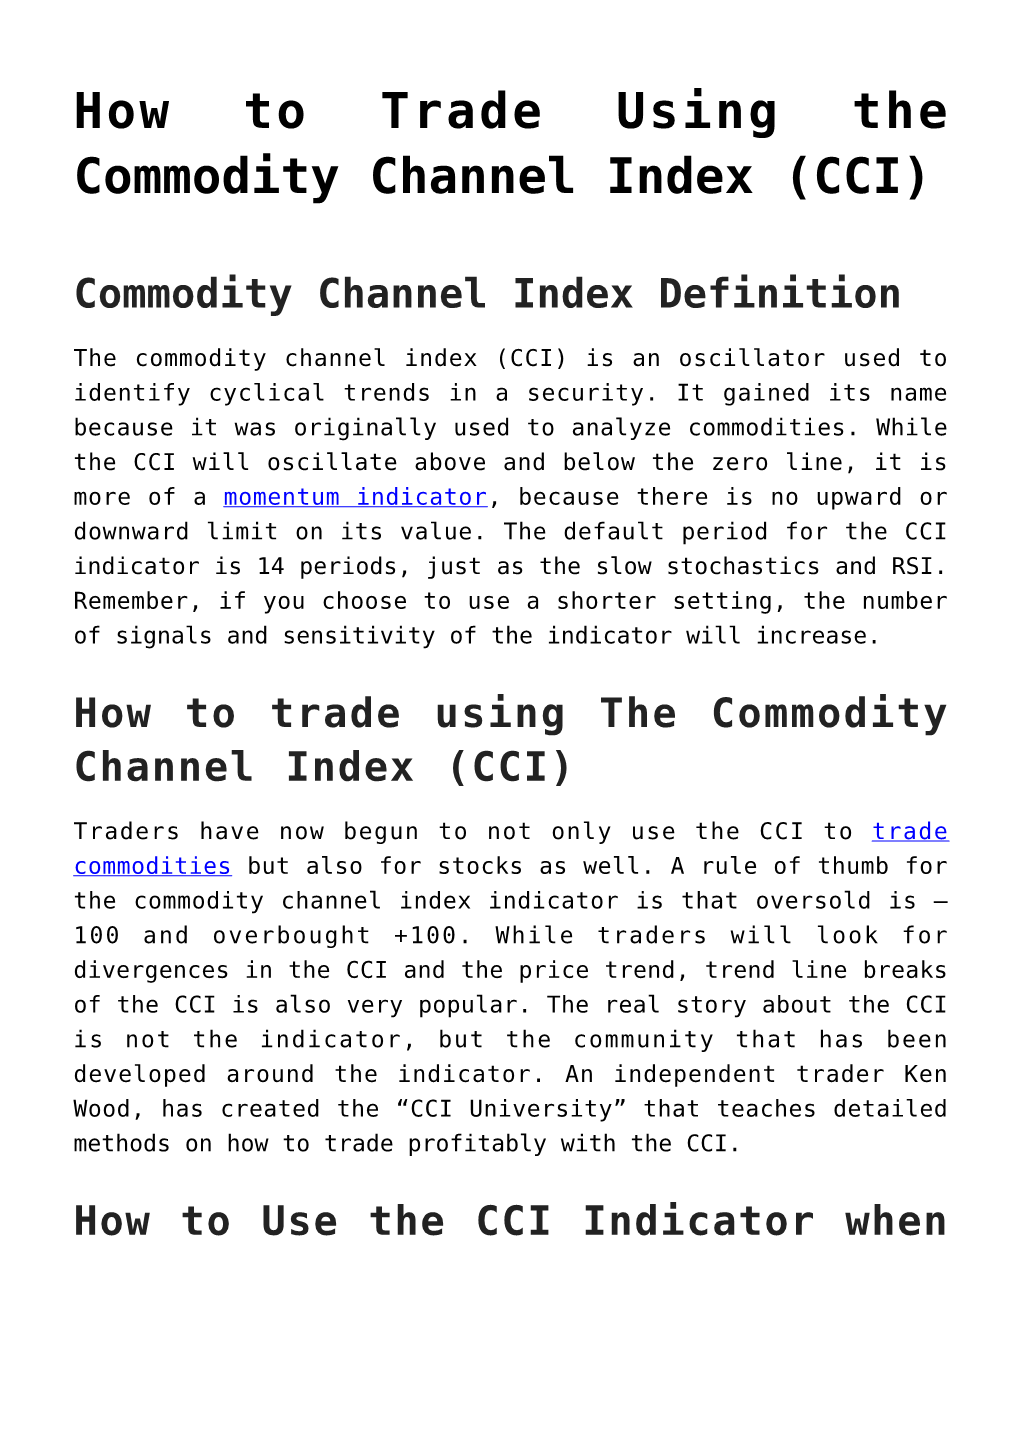 How to Trade Using the Commodity Channel Index (CCI)